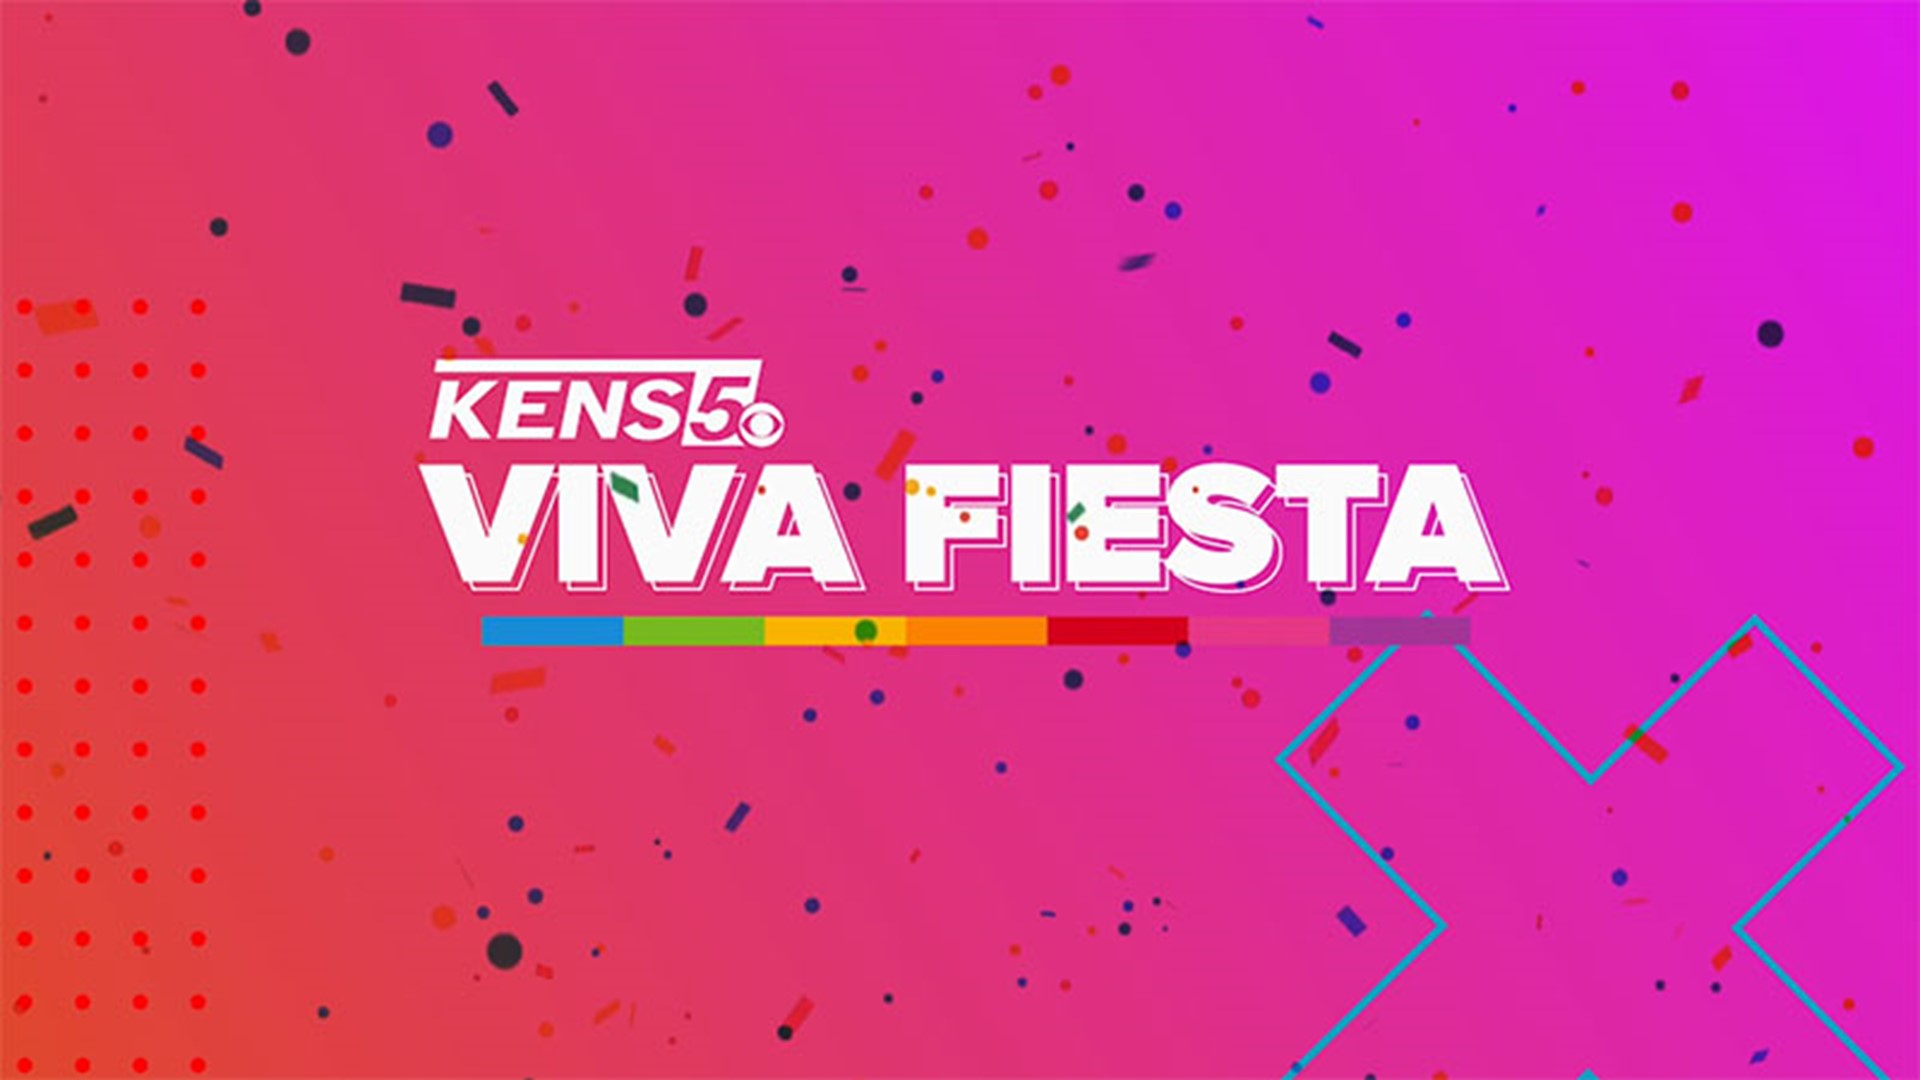 You can enjoy more than 100 events across 11 days of Fiesta in San Antonio this year. KENS 5's Audrey Castoreno and Henry Ramos are here to get your party started!